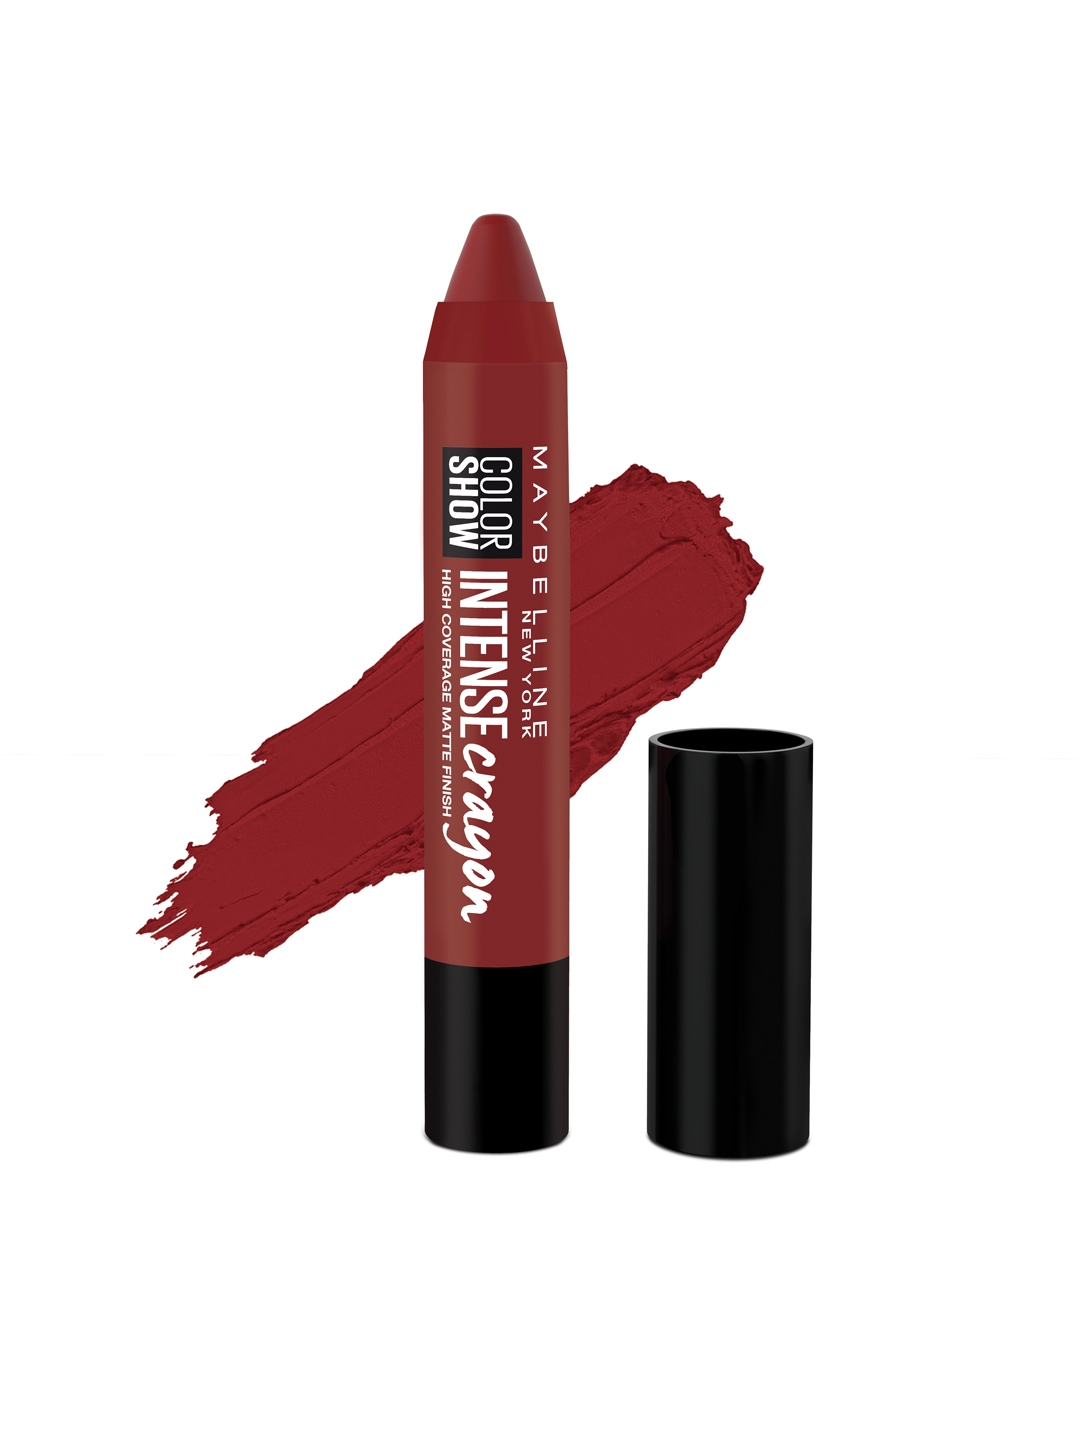 Maybelline New York Color Show Intense Crayon Lipstick   Magnetic Maroon